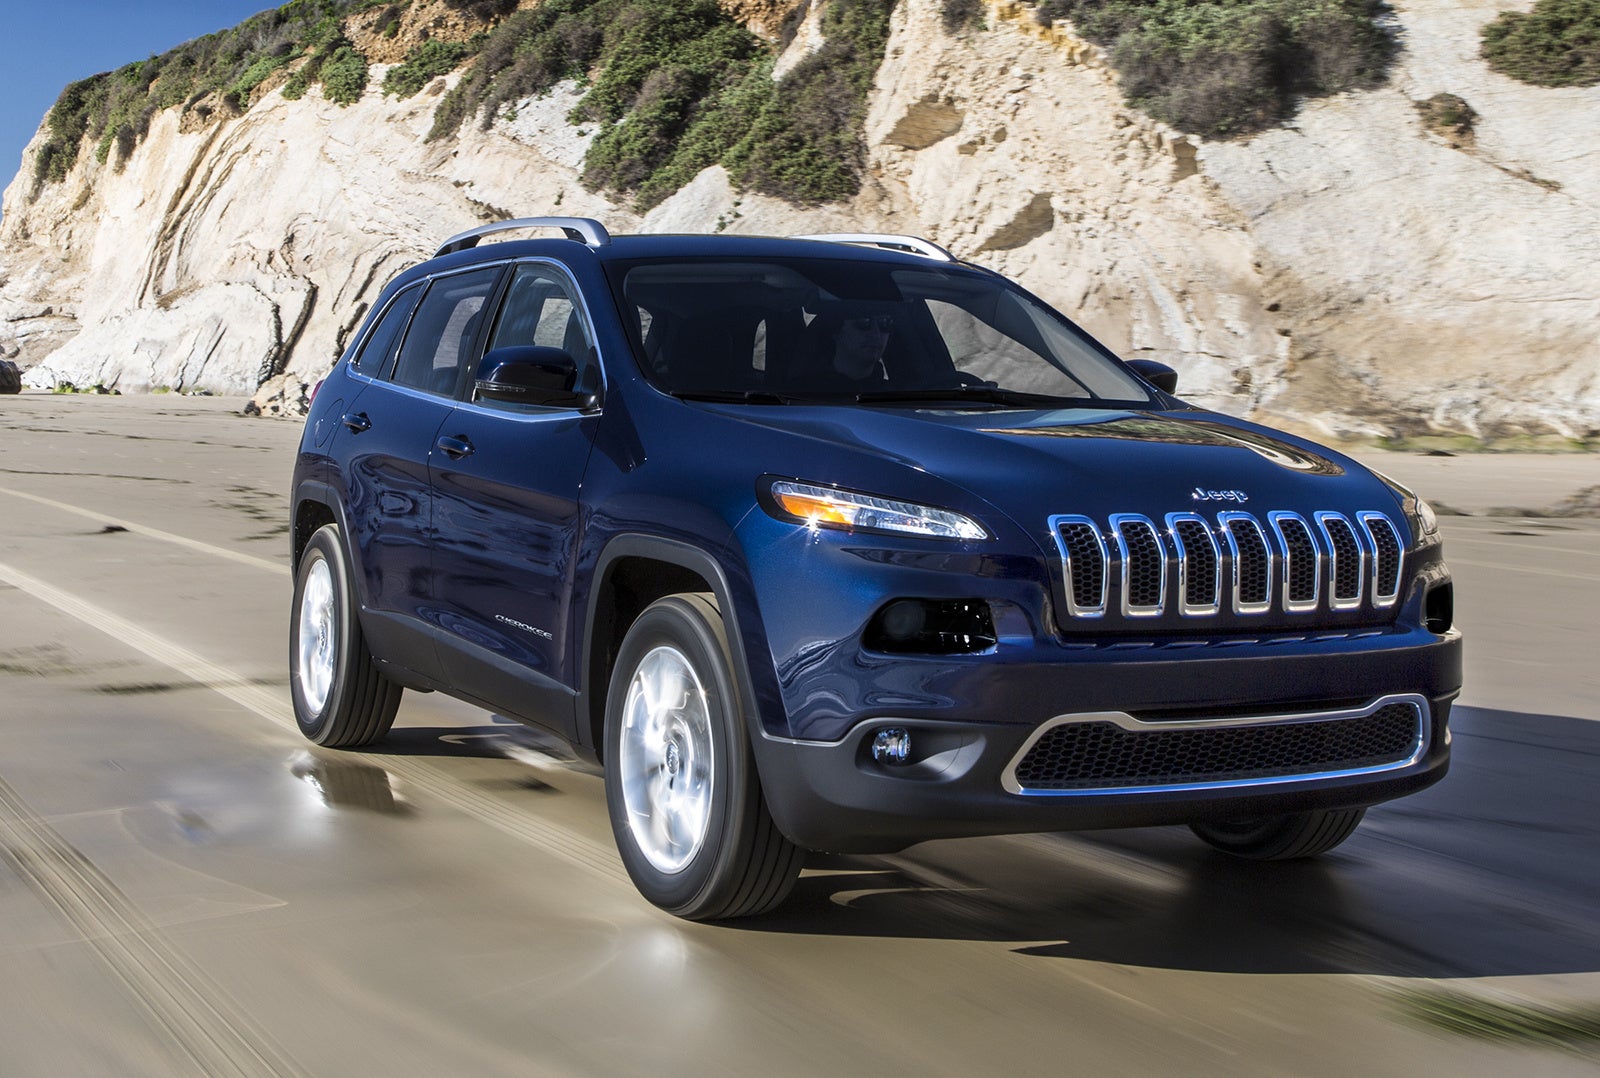 2016 / 2017 Jeep Cherokee for Sale in your area - CarGurus